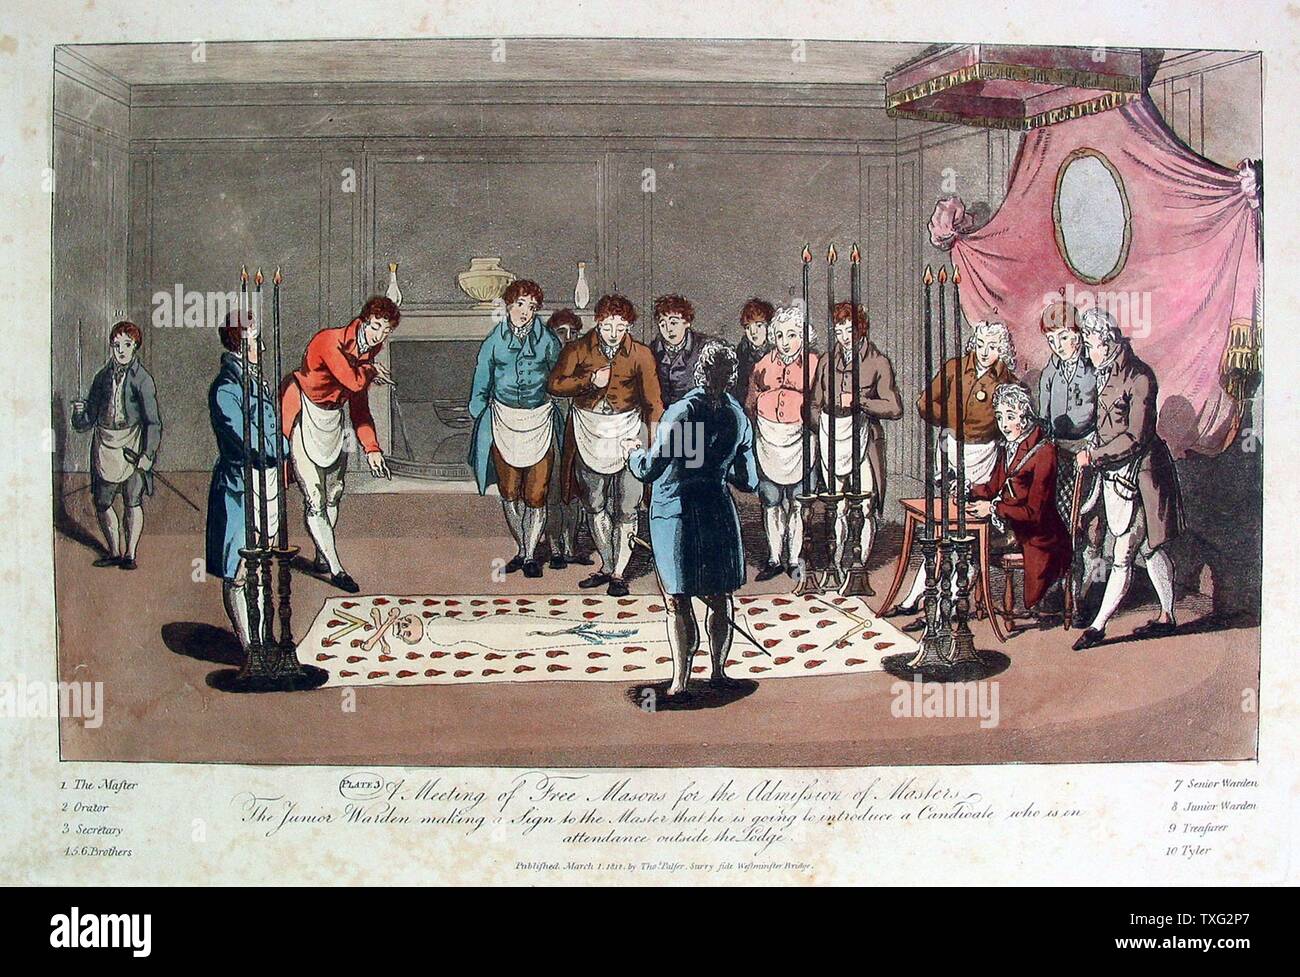 Elevation to Master I Early 19th century  English lithograph (25 cm x 39 cm) after the French engravers known as 'Gabanon' in the mid 18th century. Preparations before the applicant enters the lodge. Paris, musée de la Franc-Maçonnerie Stock Photo